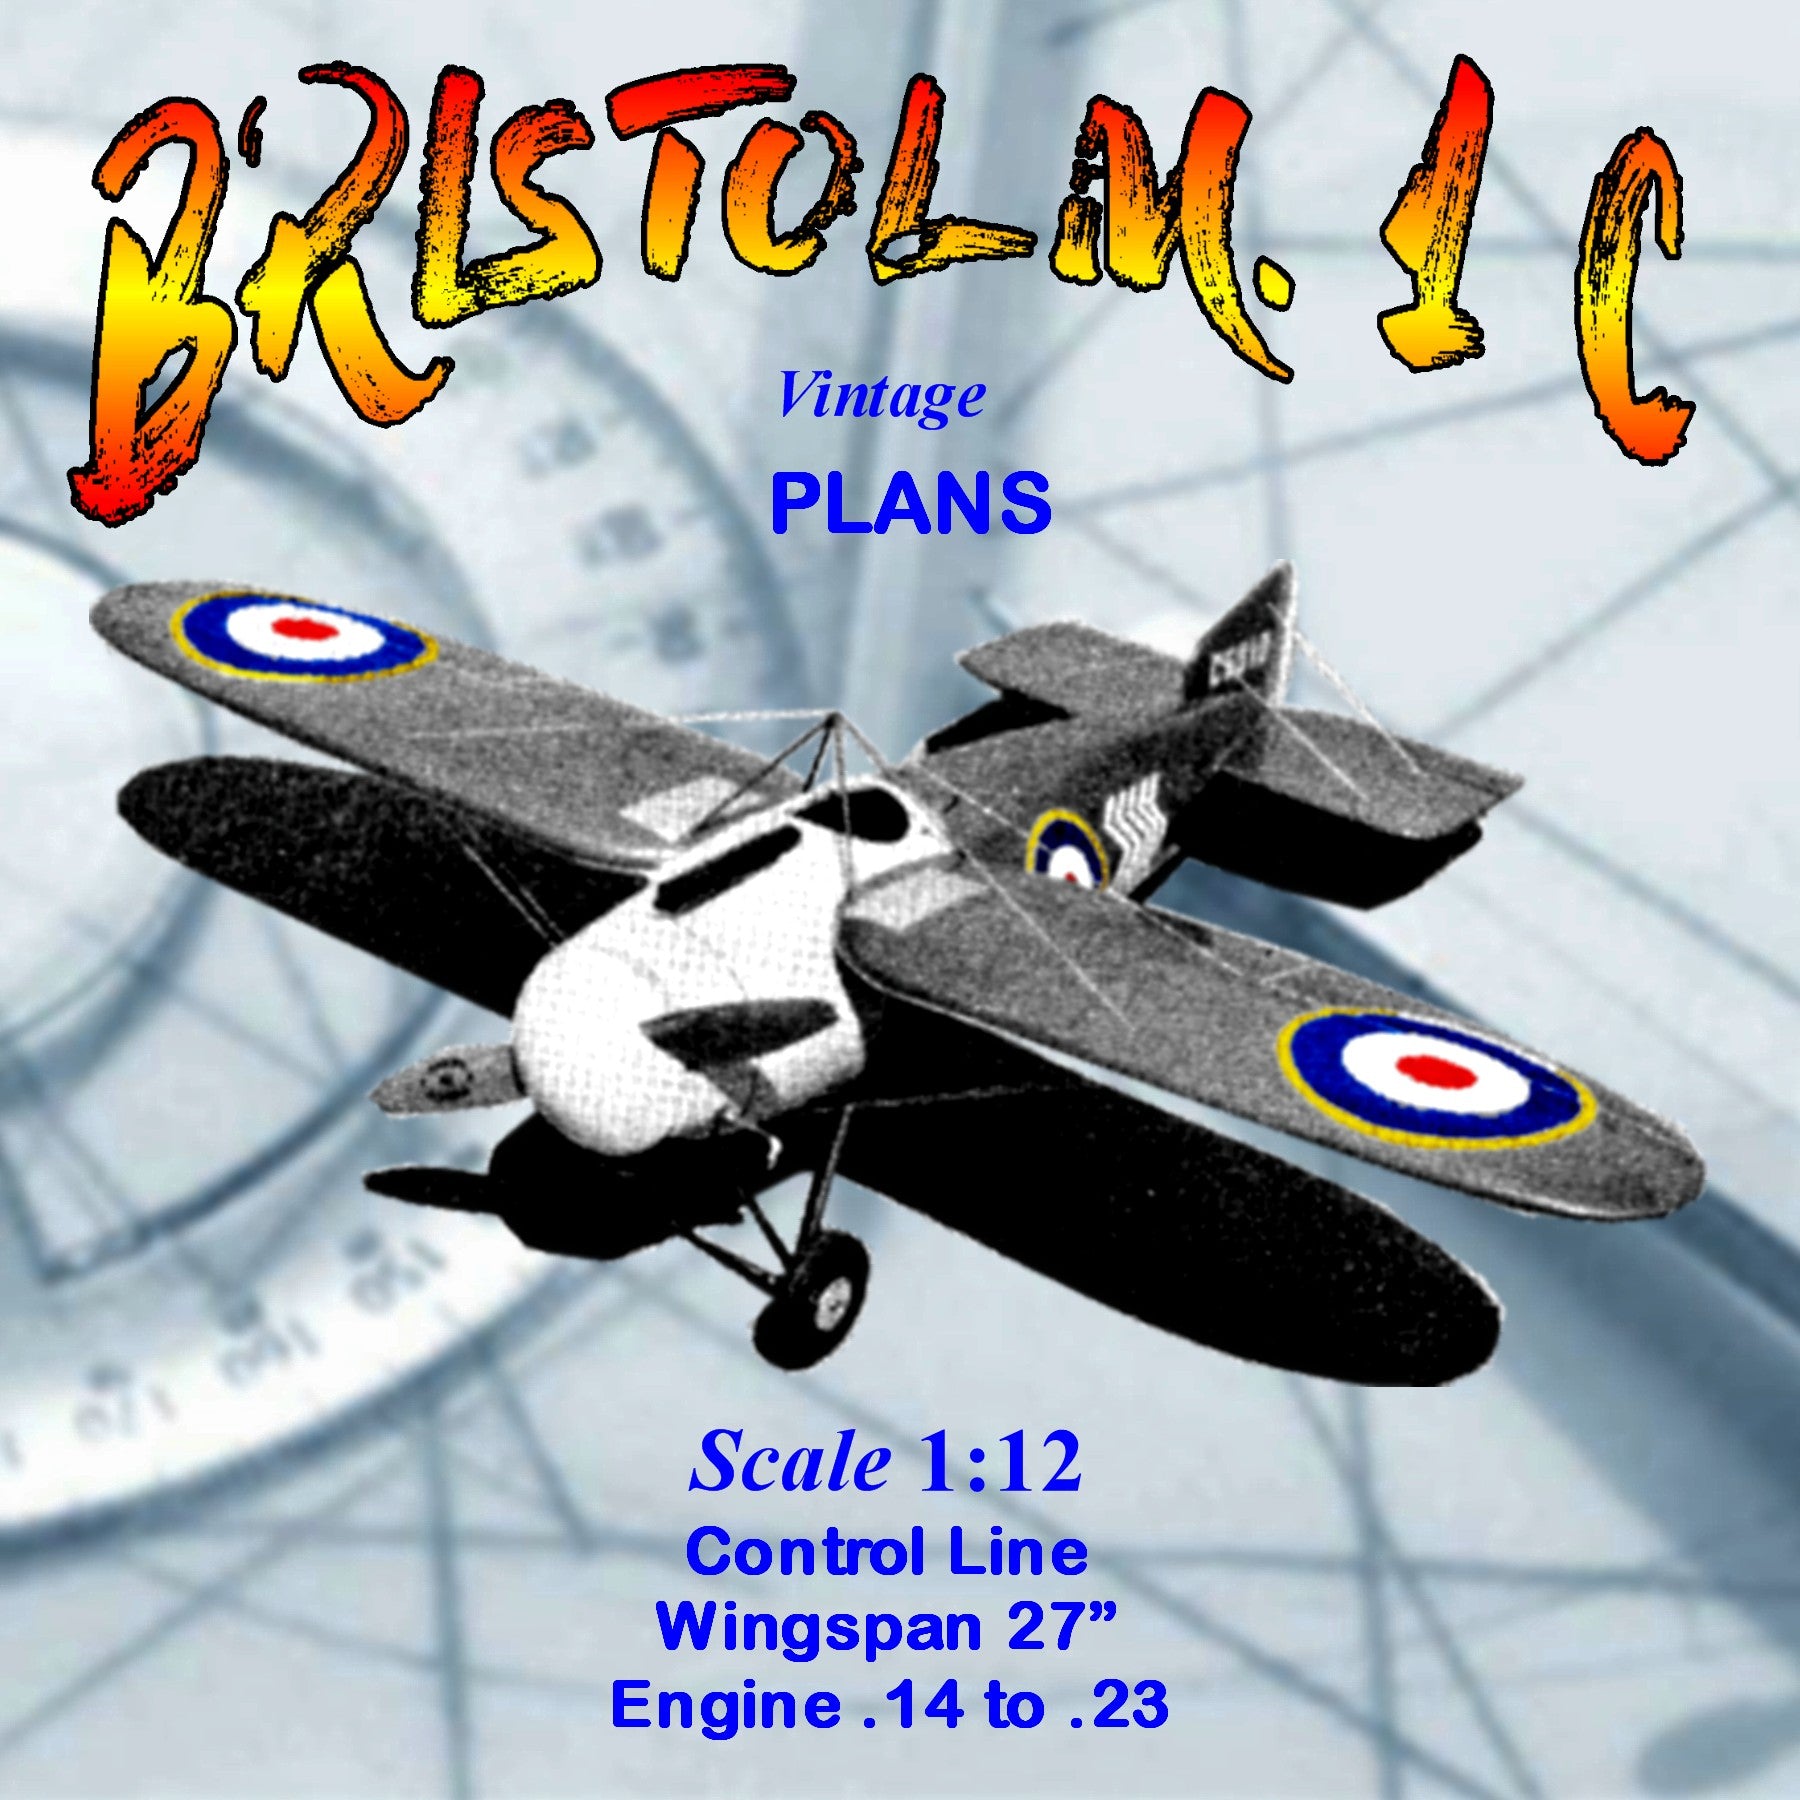 full size printed plans scale 1:12  control line world war one  bristol m. i c